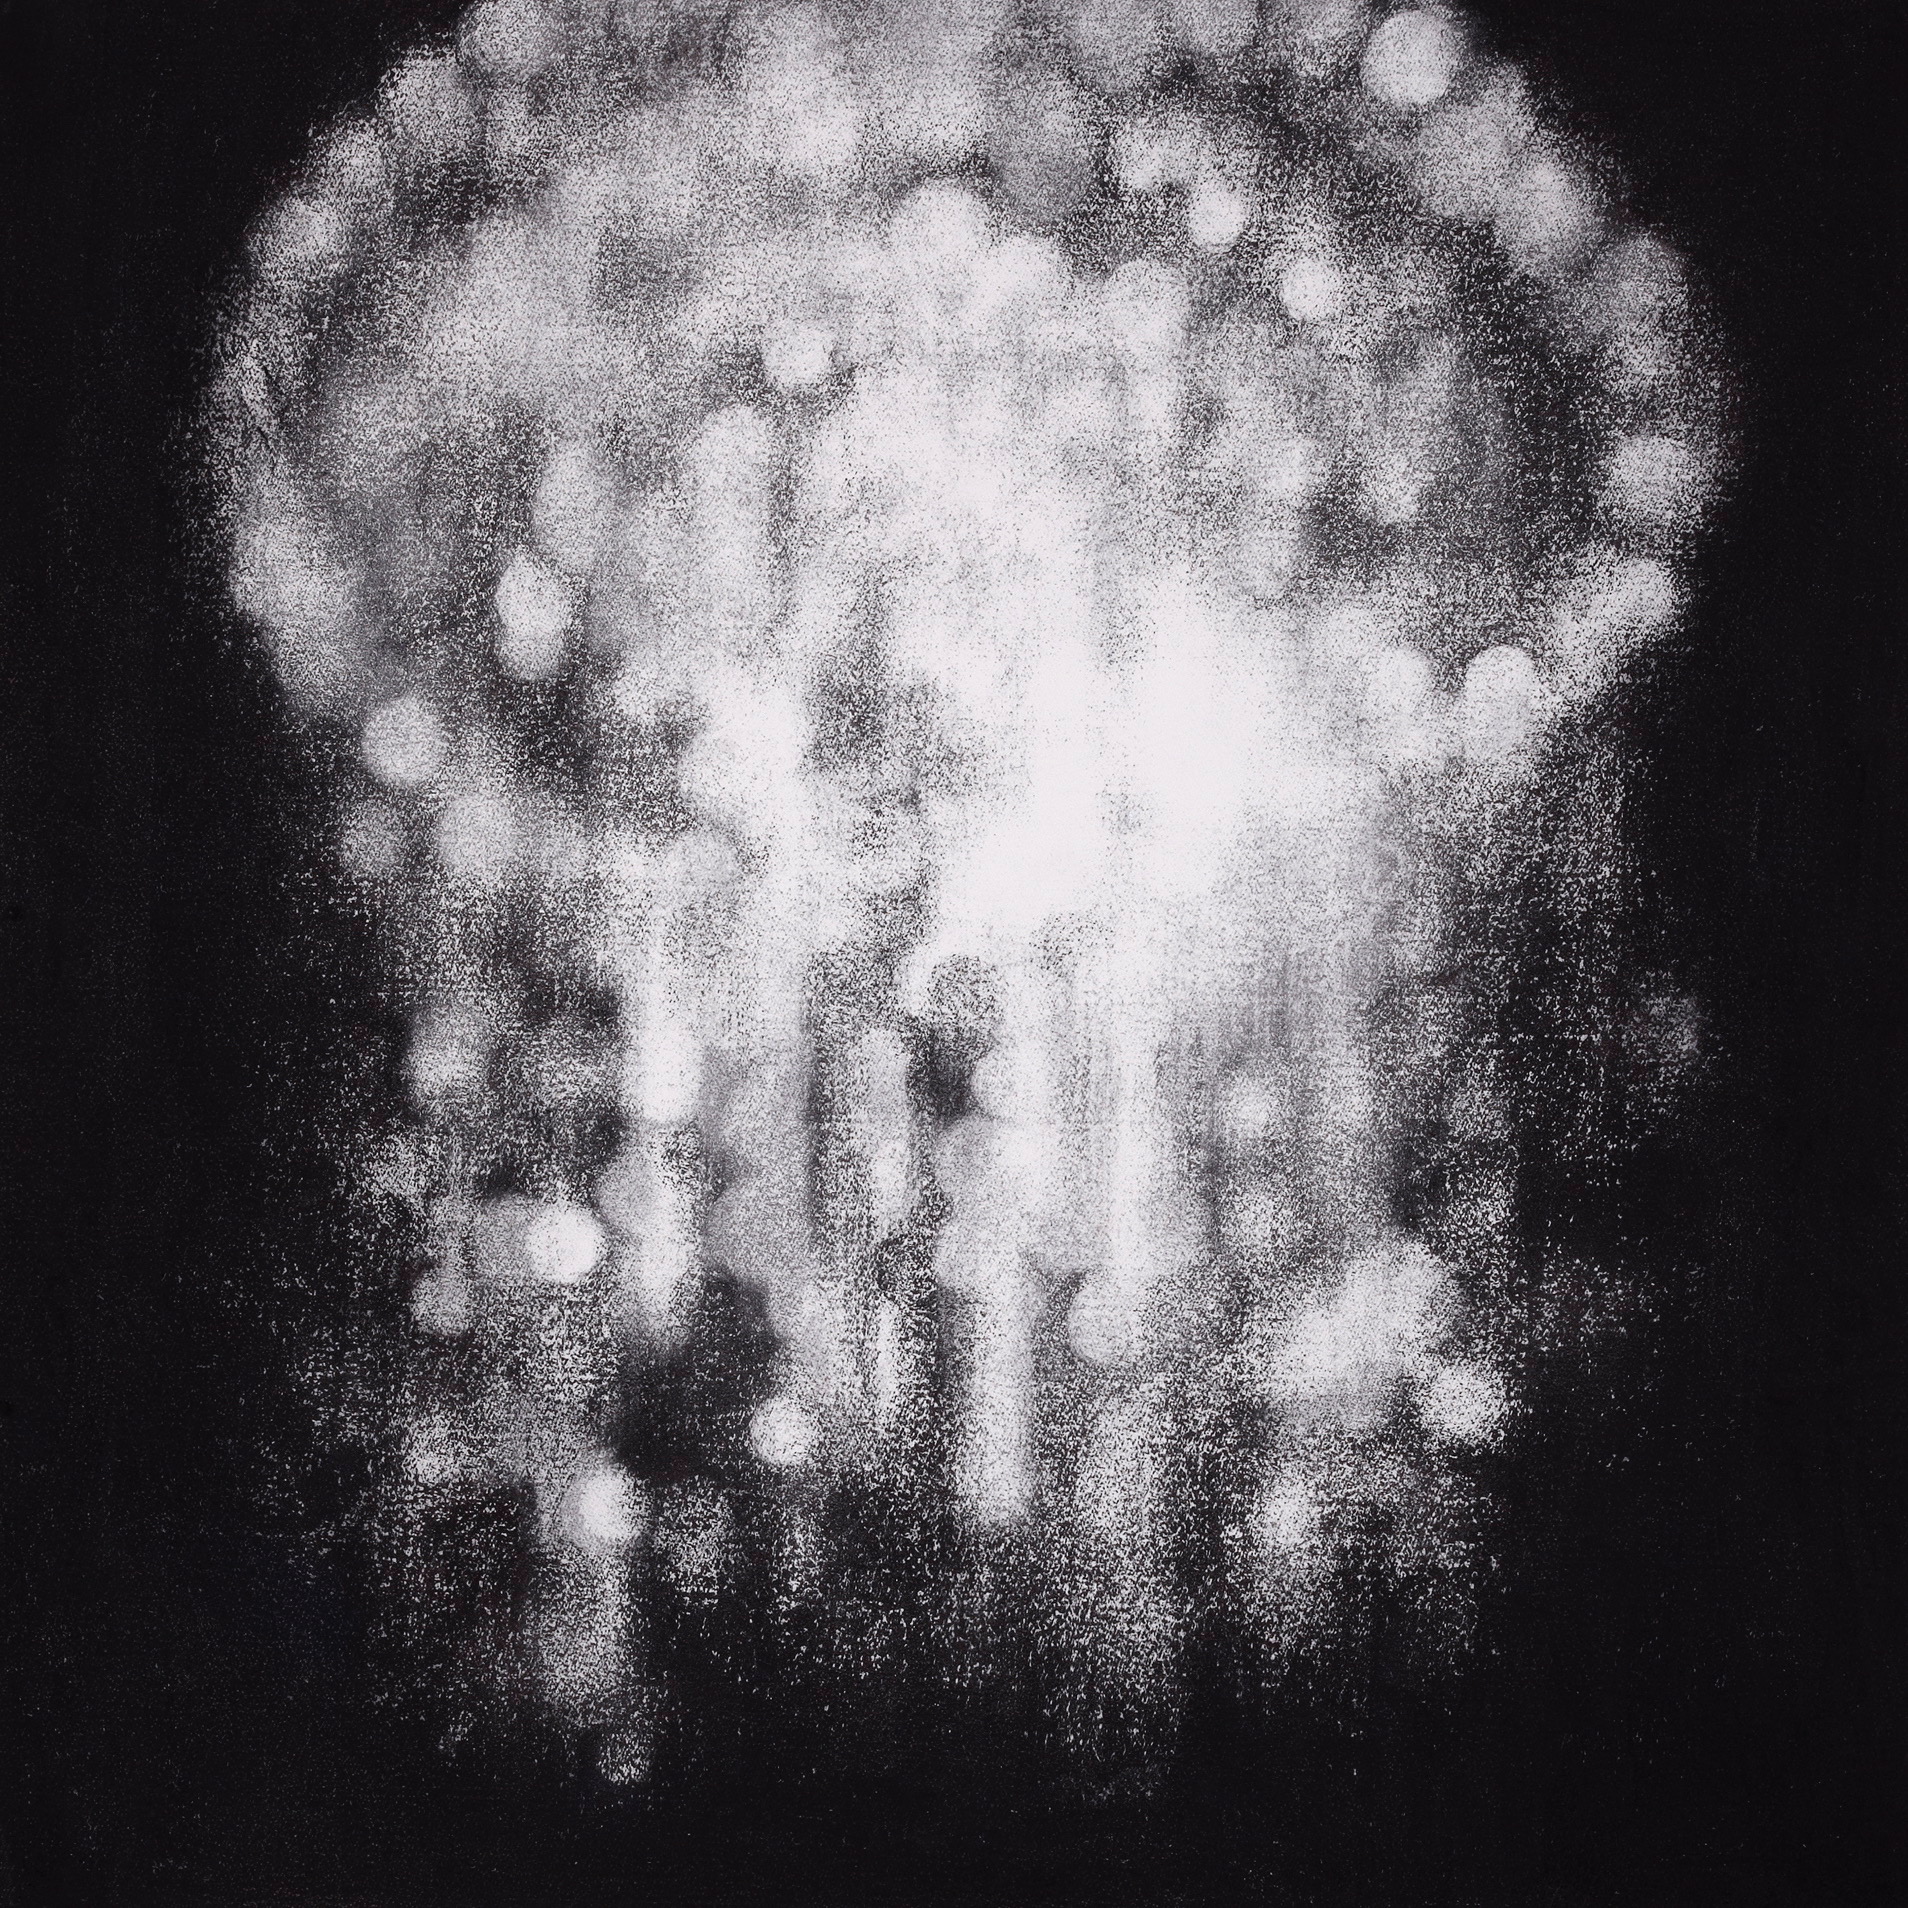  Chandelier white light, 2009, charcoal on paper, 102x102cm 